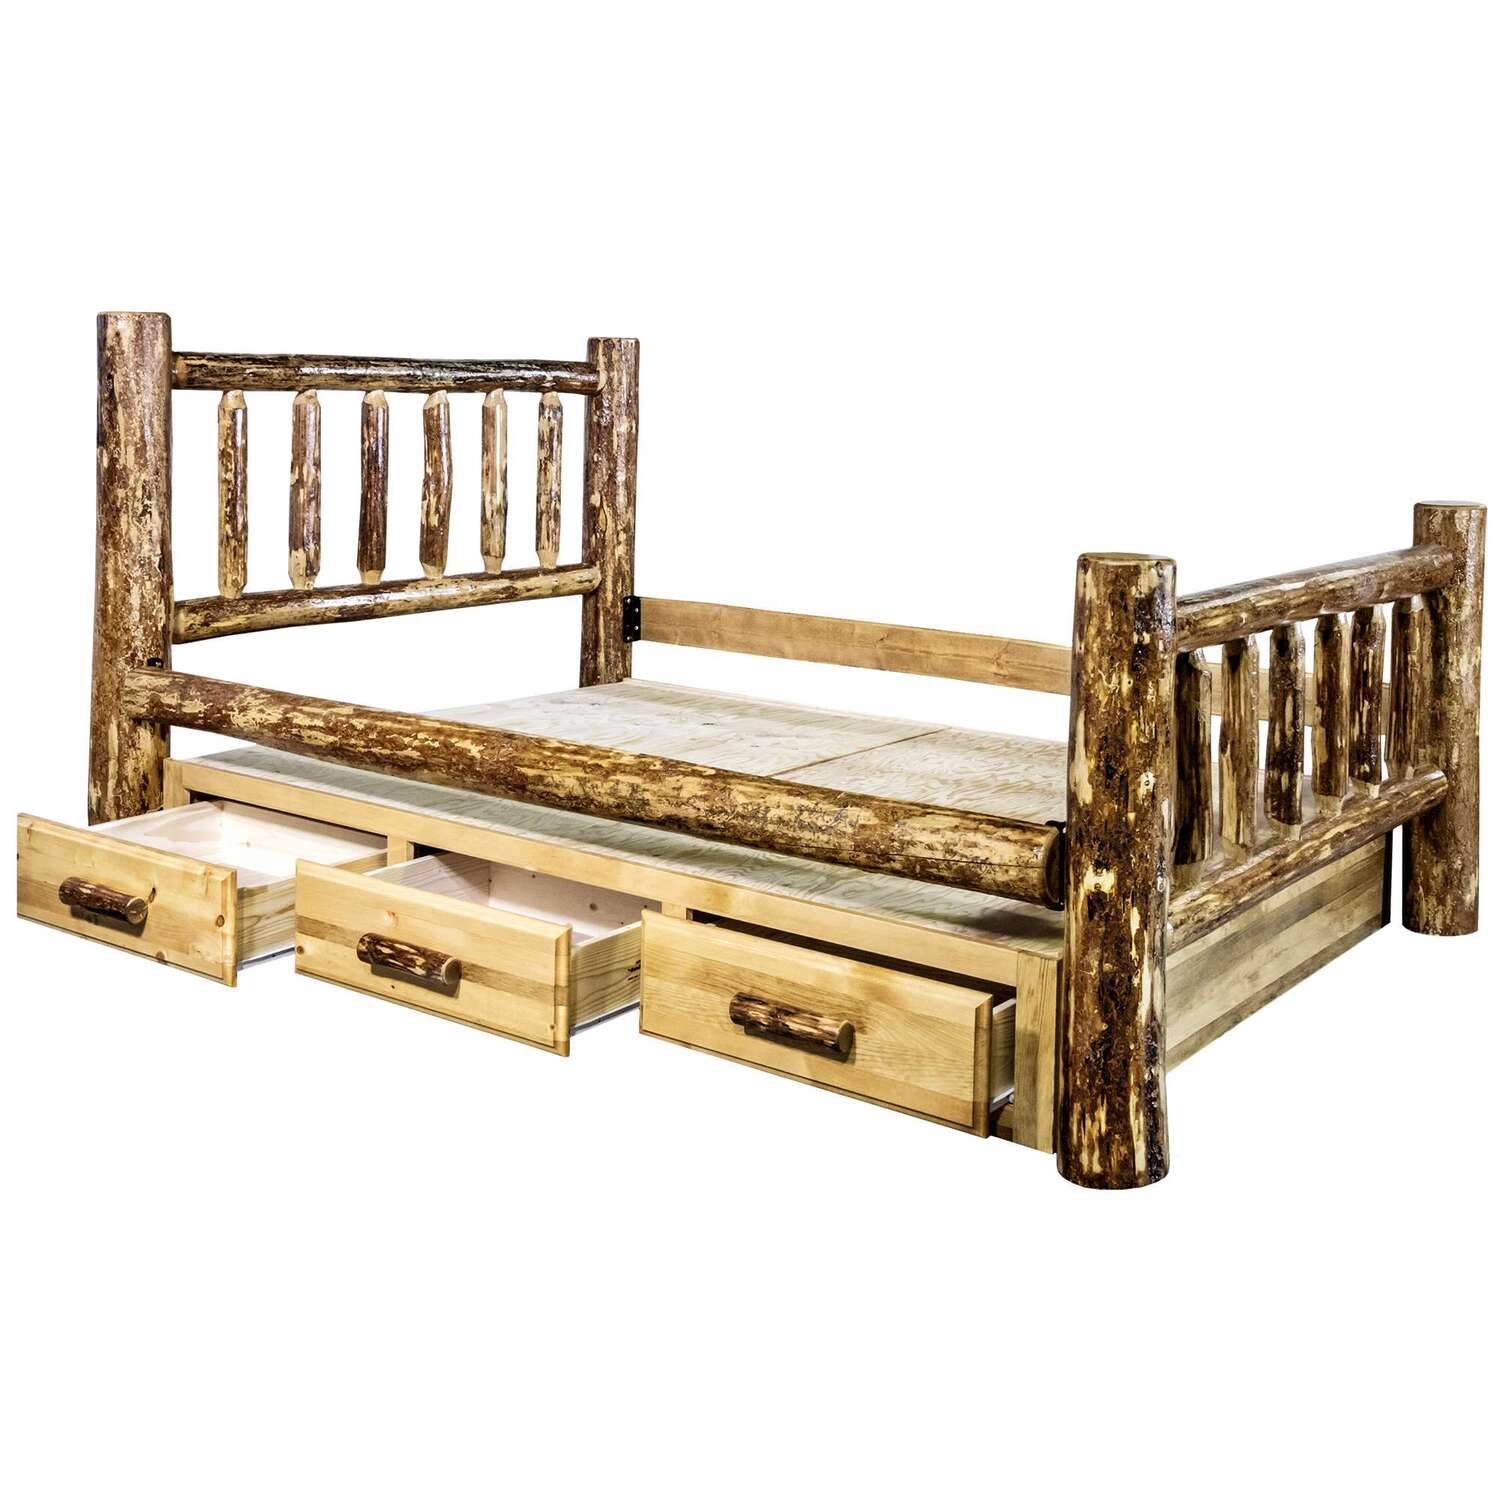 Glacier Country Collection California King Bed w/ Storage - image 5 of 5